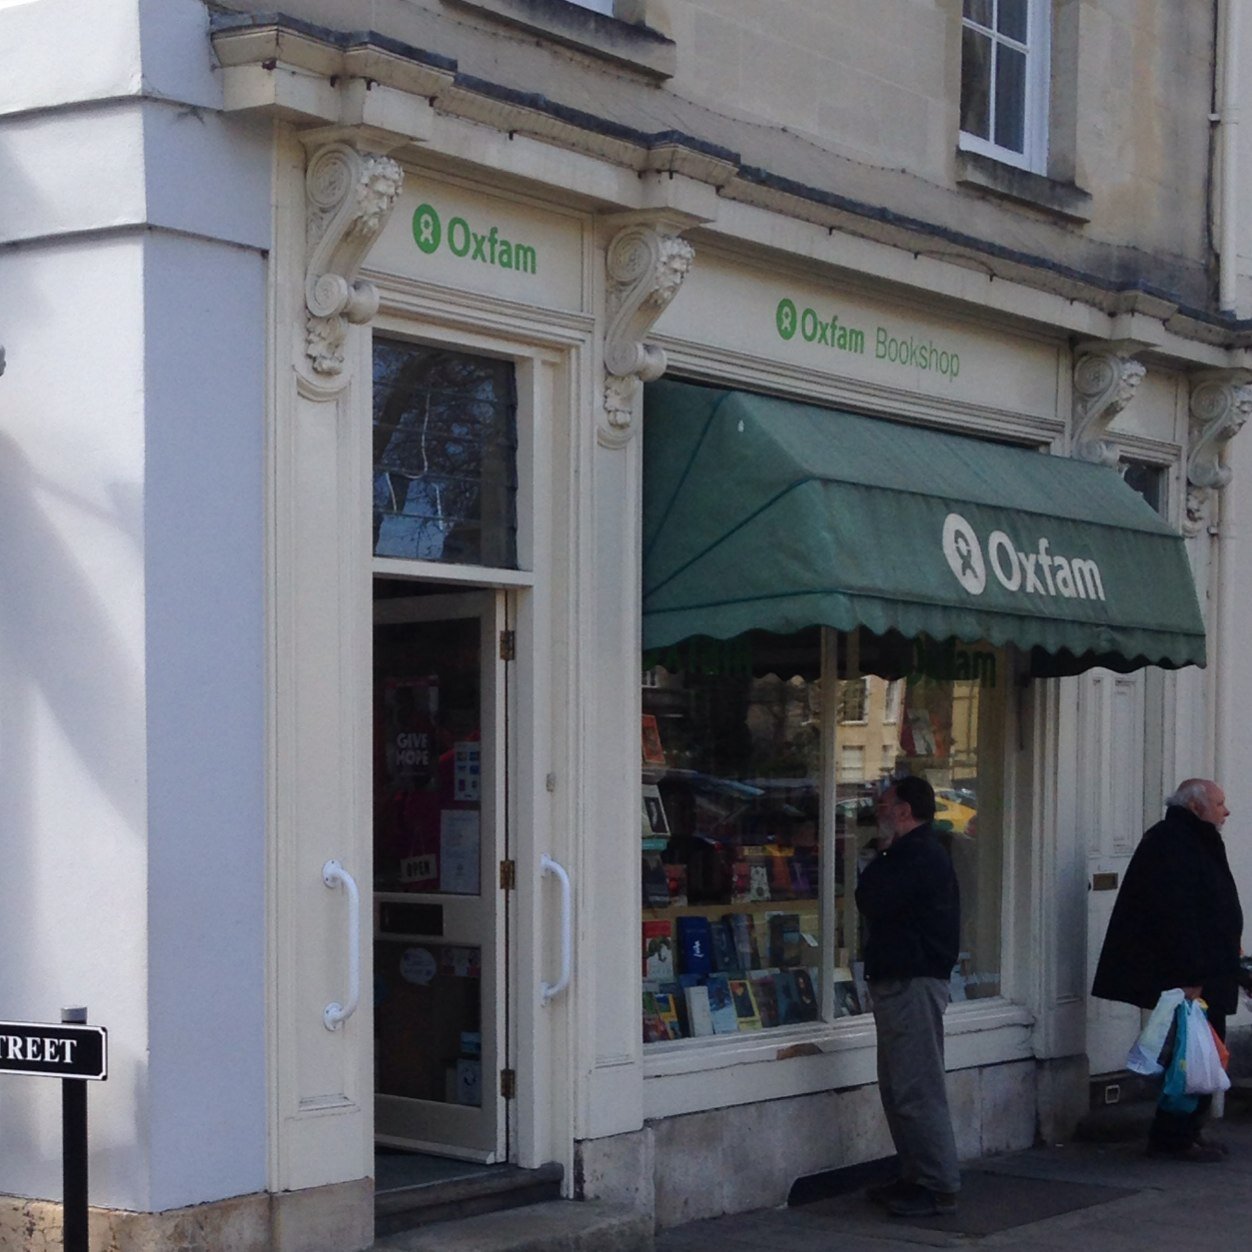 Oxfam's first specialist bookshop, at 56 St. Giles Street in Oxford. Open 7 days a week 📚